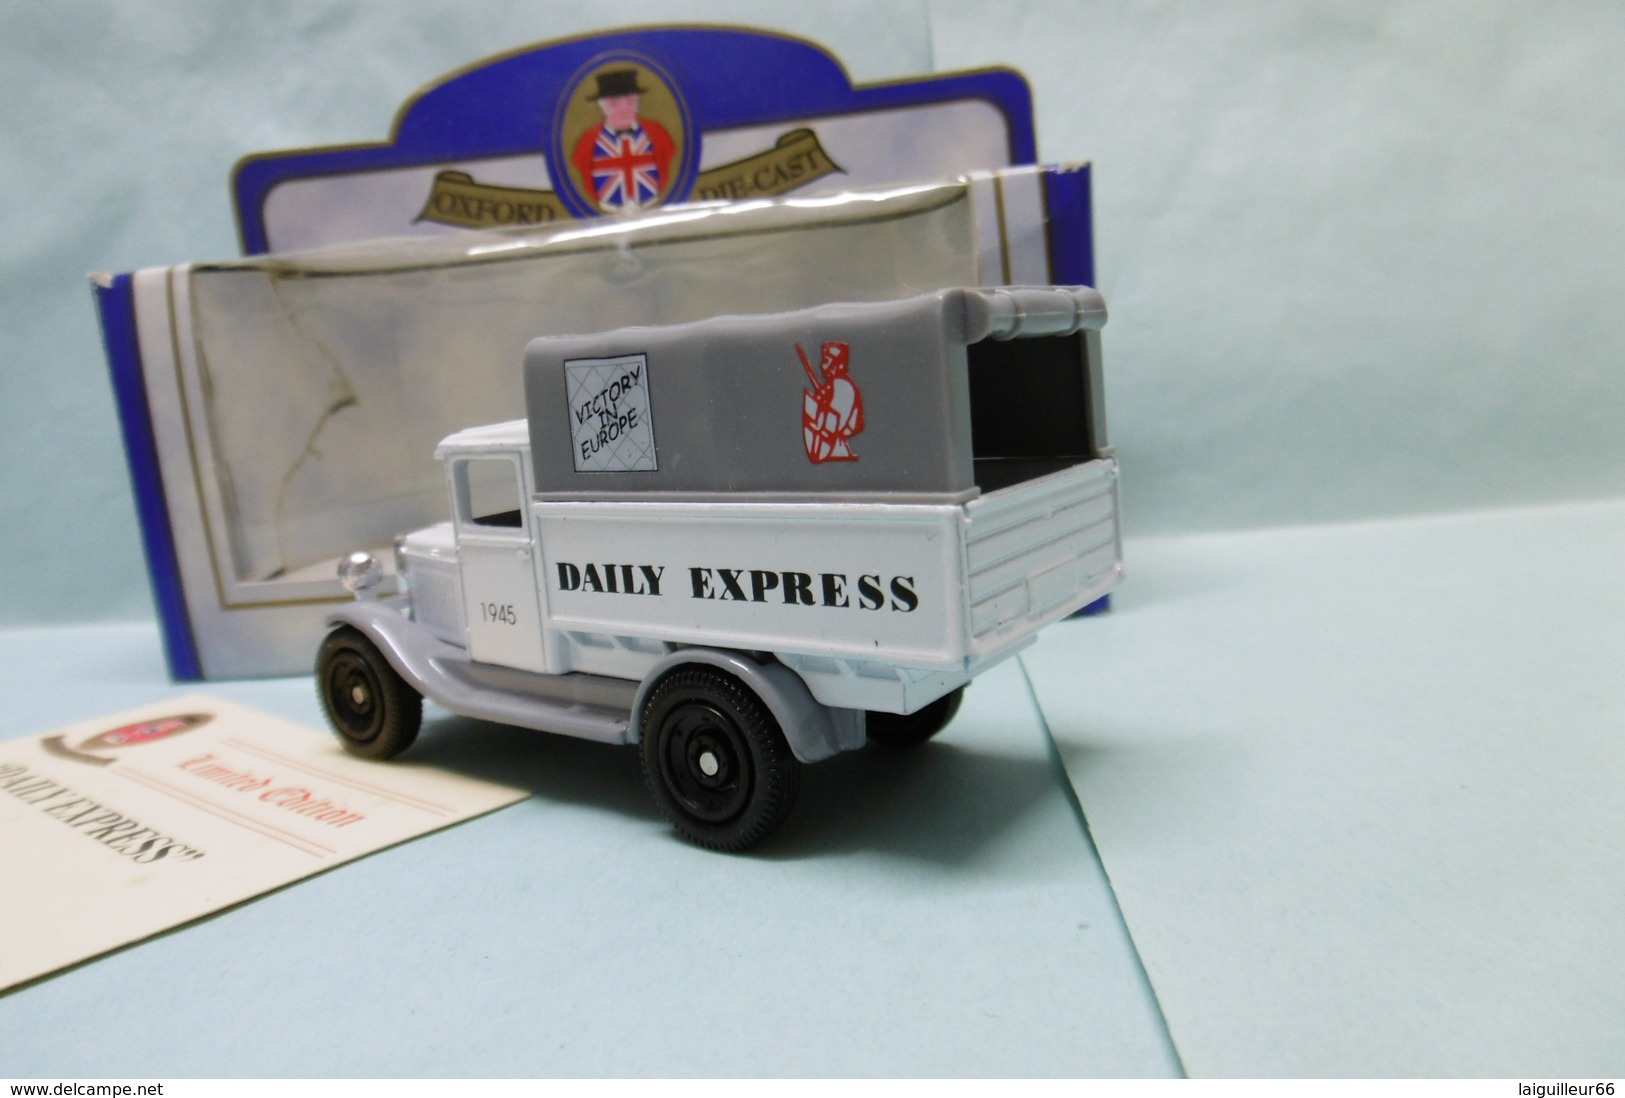 Oxford - CHEVROLET Pick-up DAILY EXPRESS Réf. C020 BO 1/43 - Commercial Vehicles